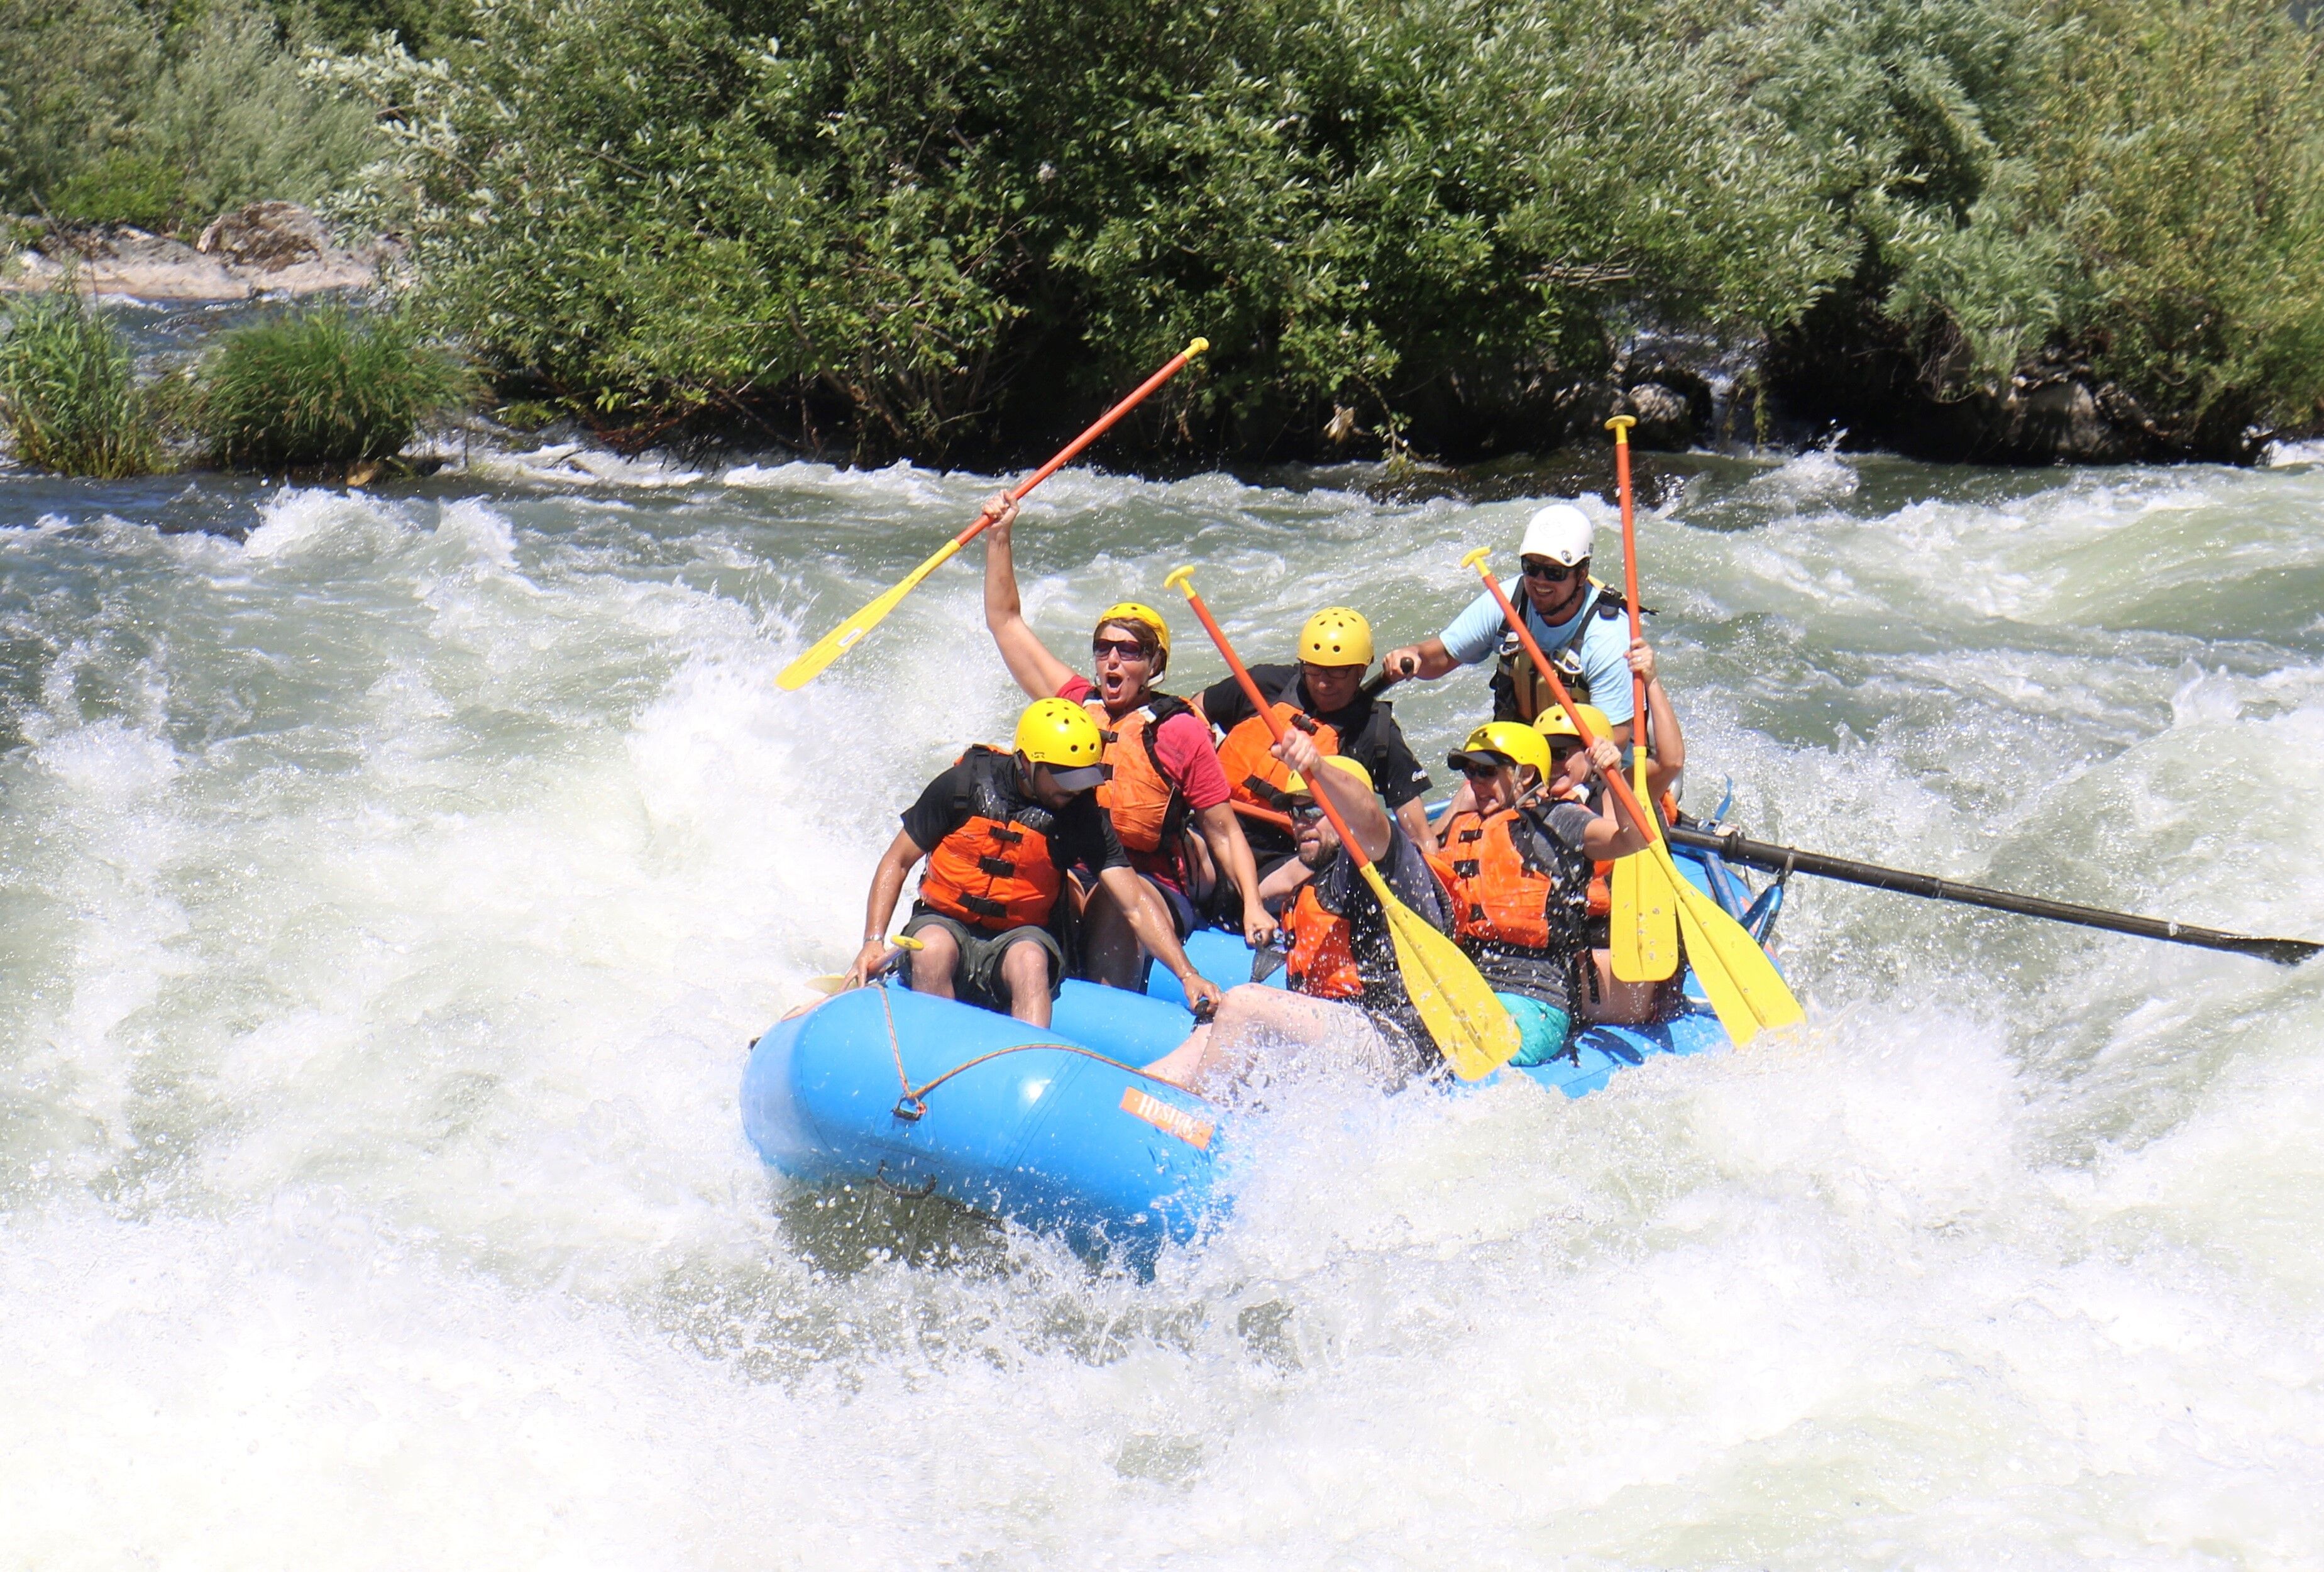 Whitewater rafting on the Rogue River